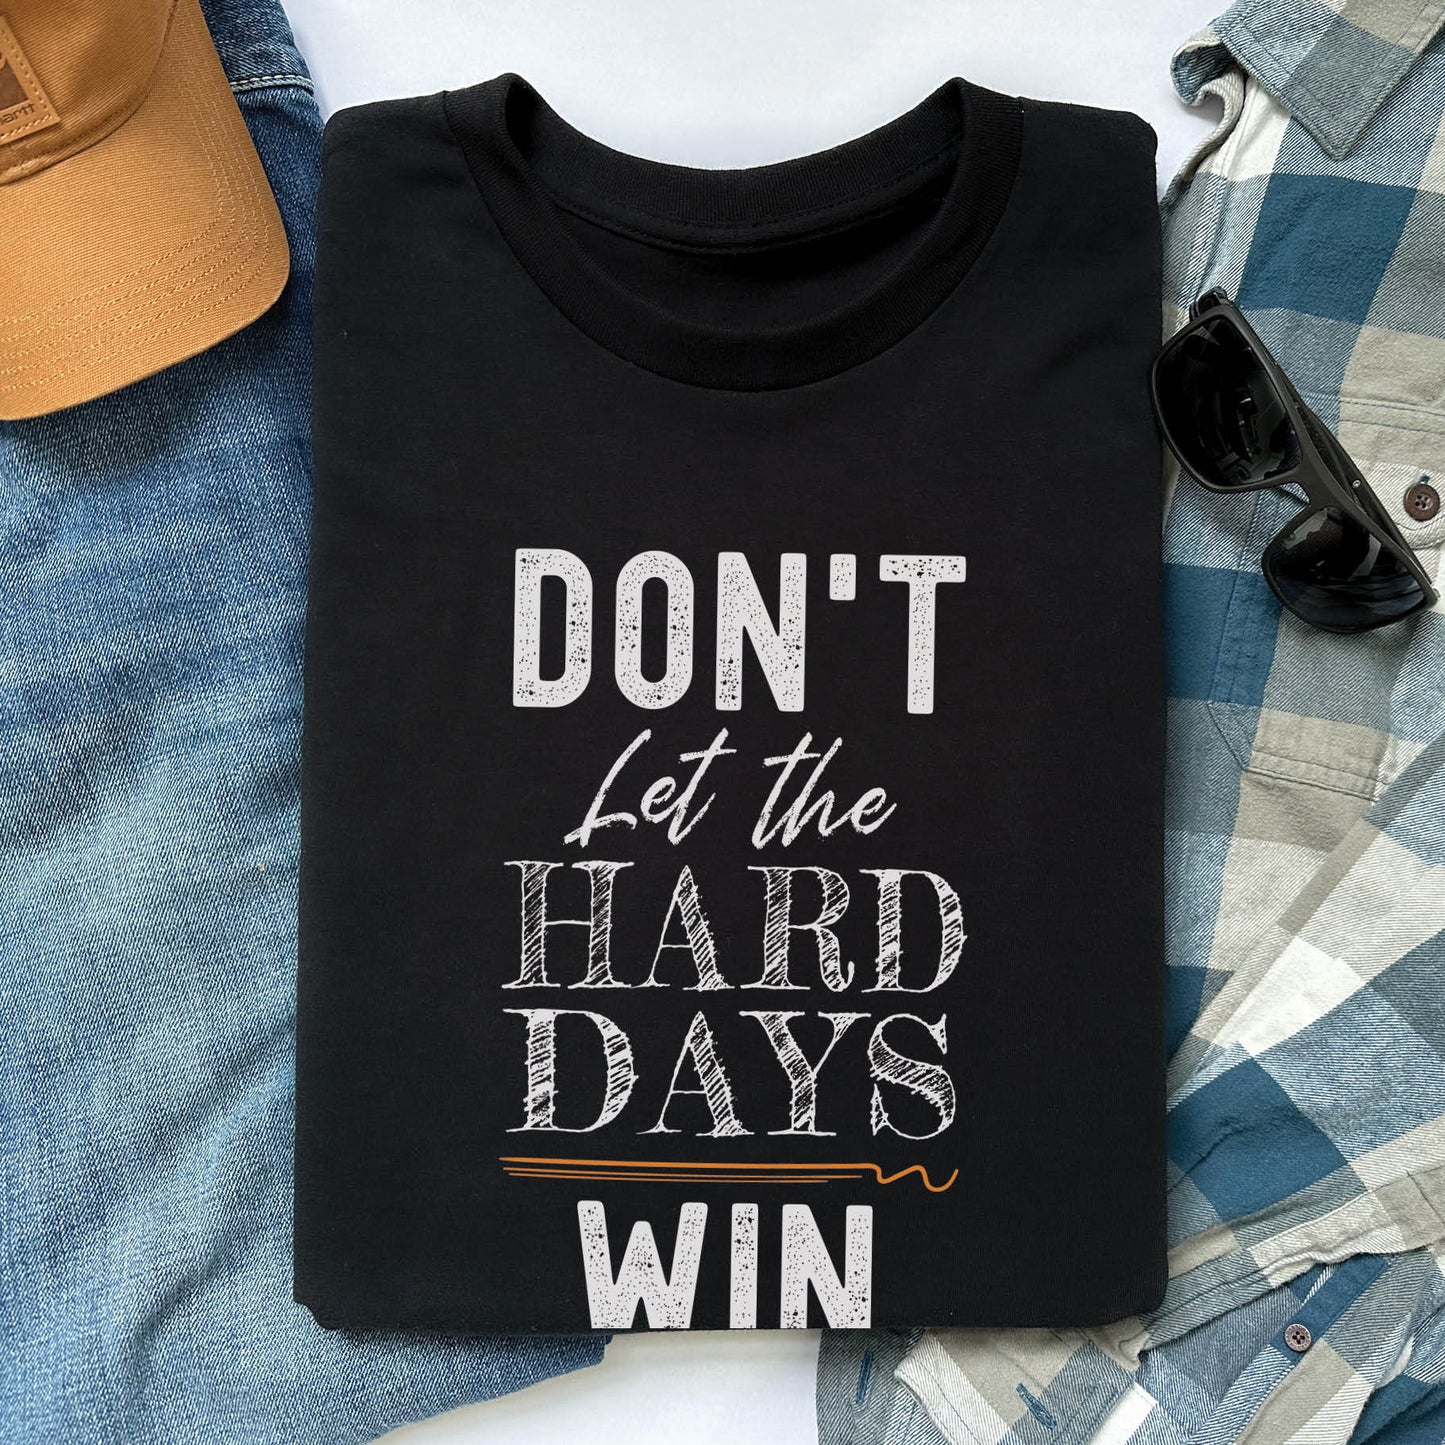 Black men's unisex Christian t-shirt with a bold typography design that says, "Don't Let The Hard Days Win" printed on the front in white and orange